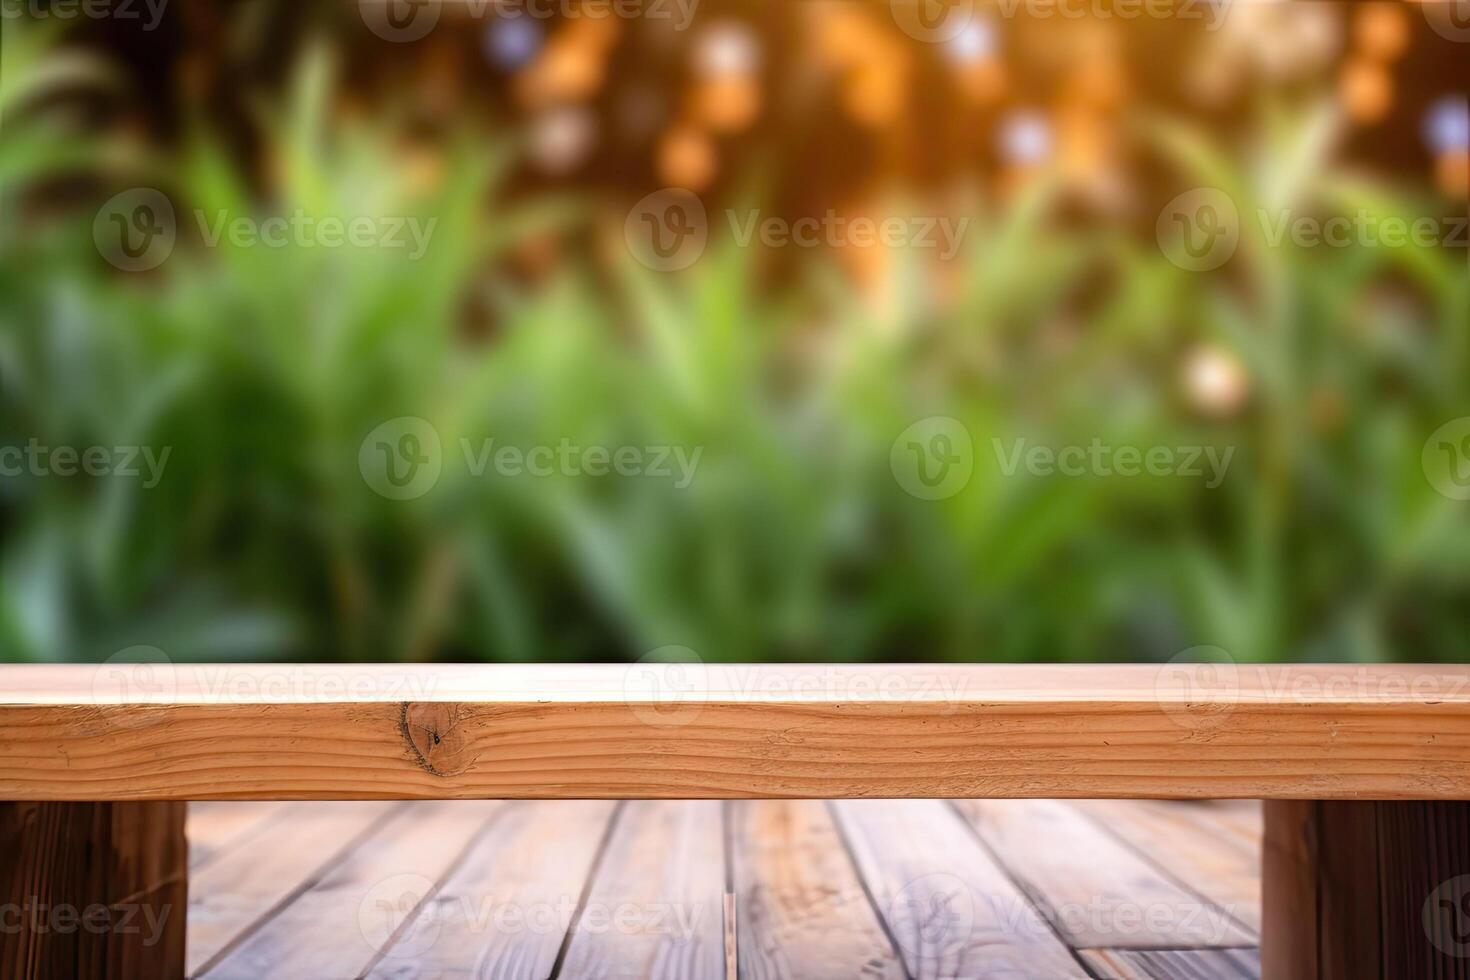 Image of wooden table in front of abstract blurred background made of plants. photo